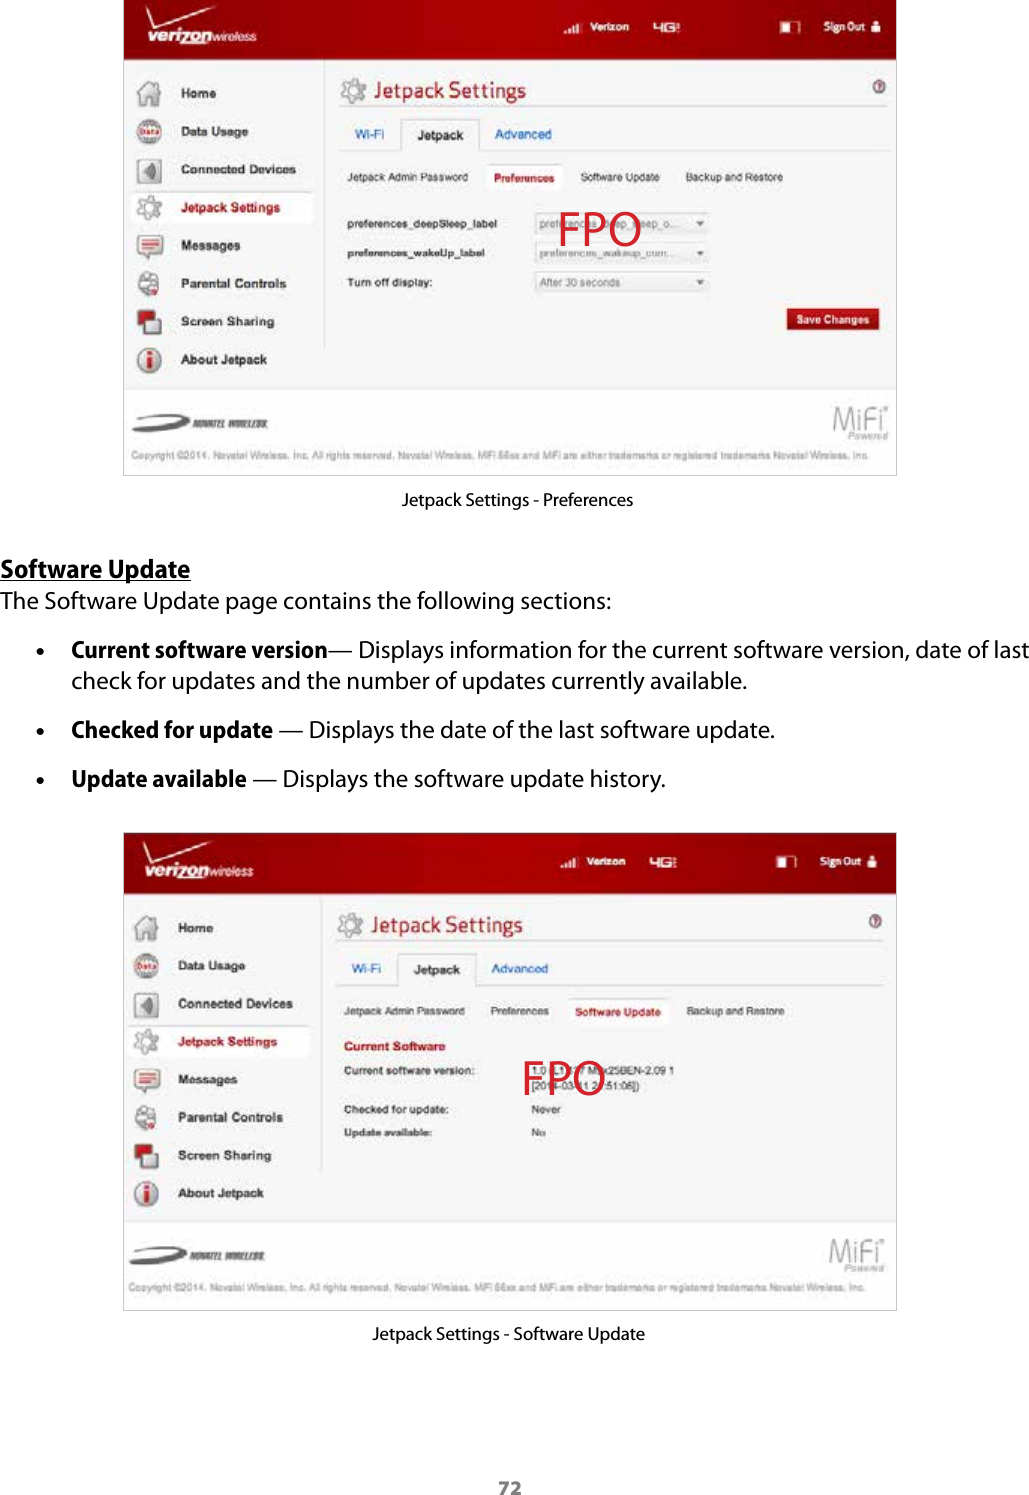 72Jetpack Settings - PreferencesSoftware UpdateThe Software Update page contains the following sections: •Current software version— Displays information for the current software version, date of last check for updates and the number of updates currently available. •Checked for update — Displays the date of the last software update. •Update available — Displays the software update history.Jetpack Settings - Software UpdateFPOFPO